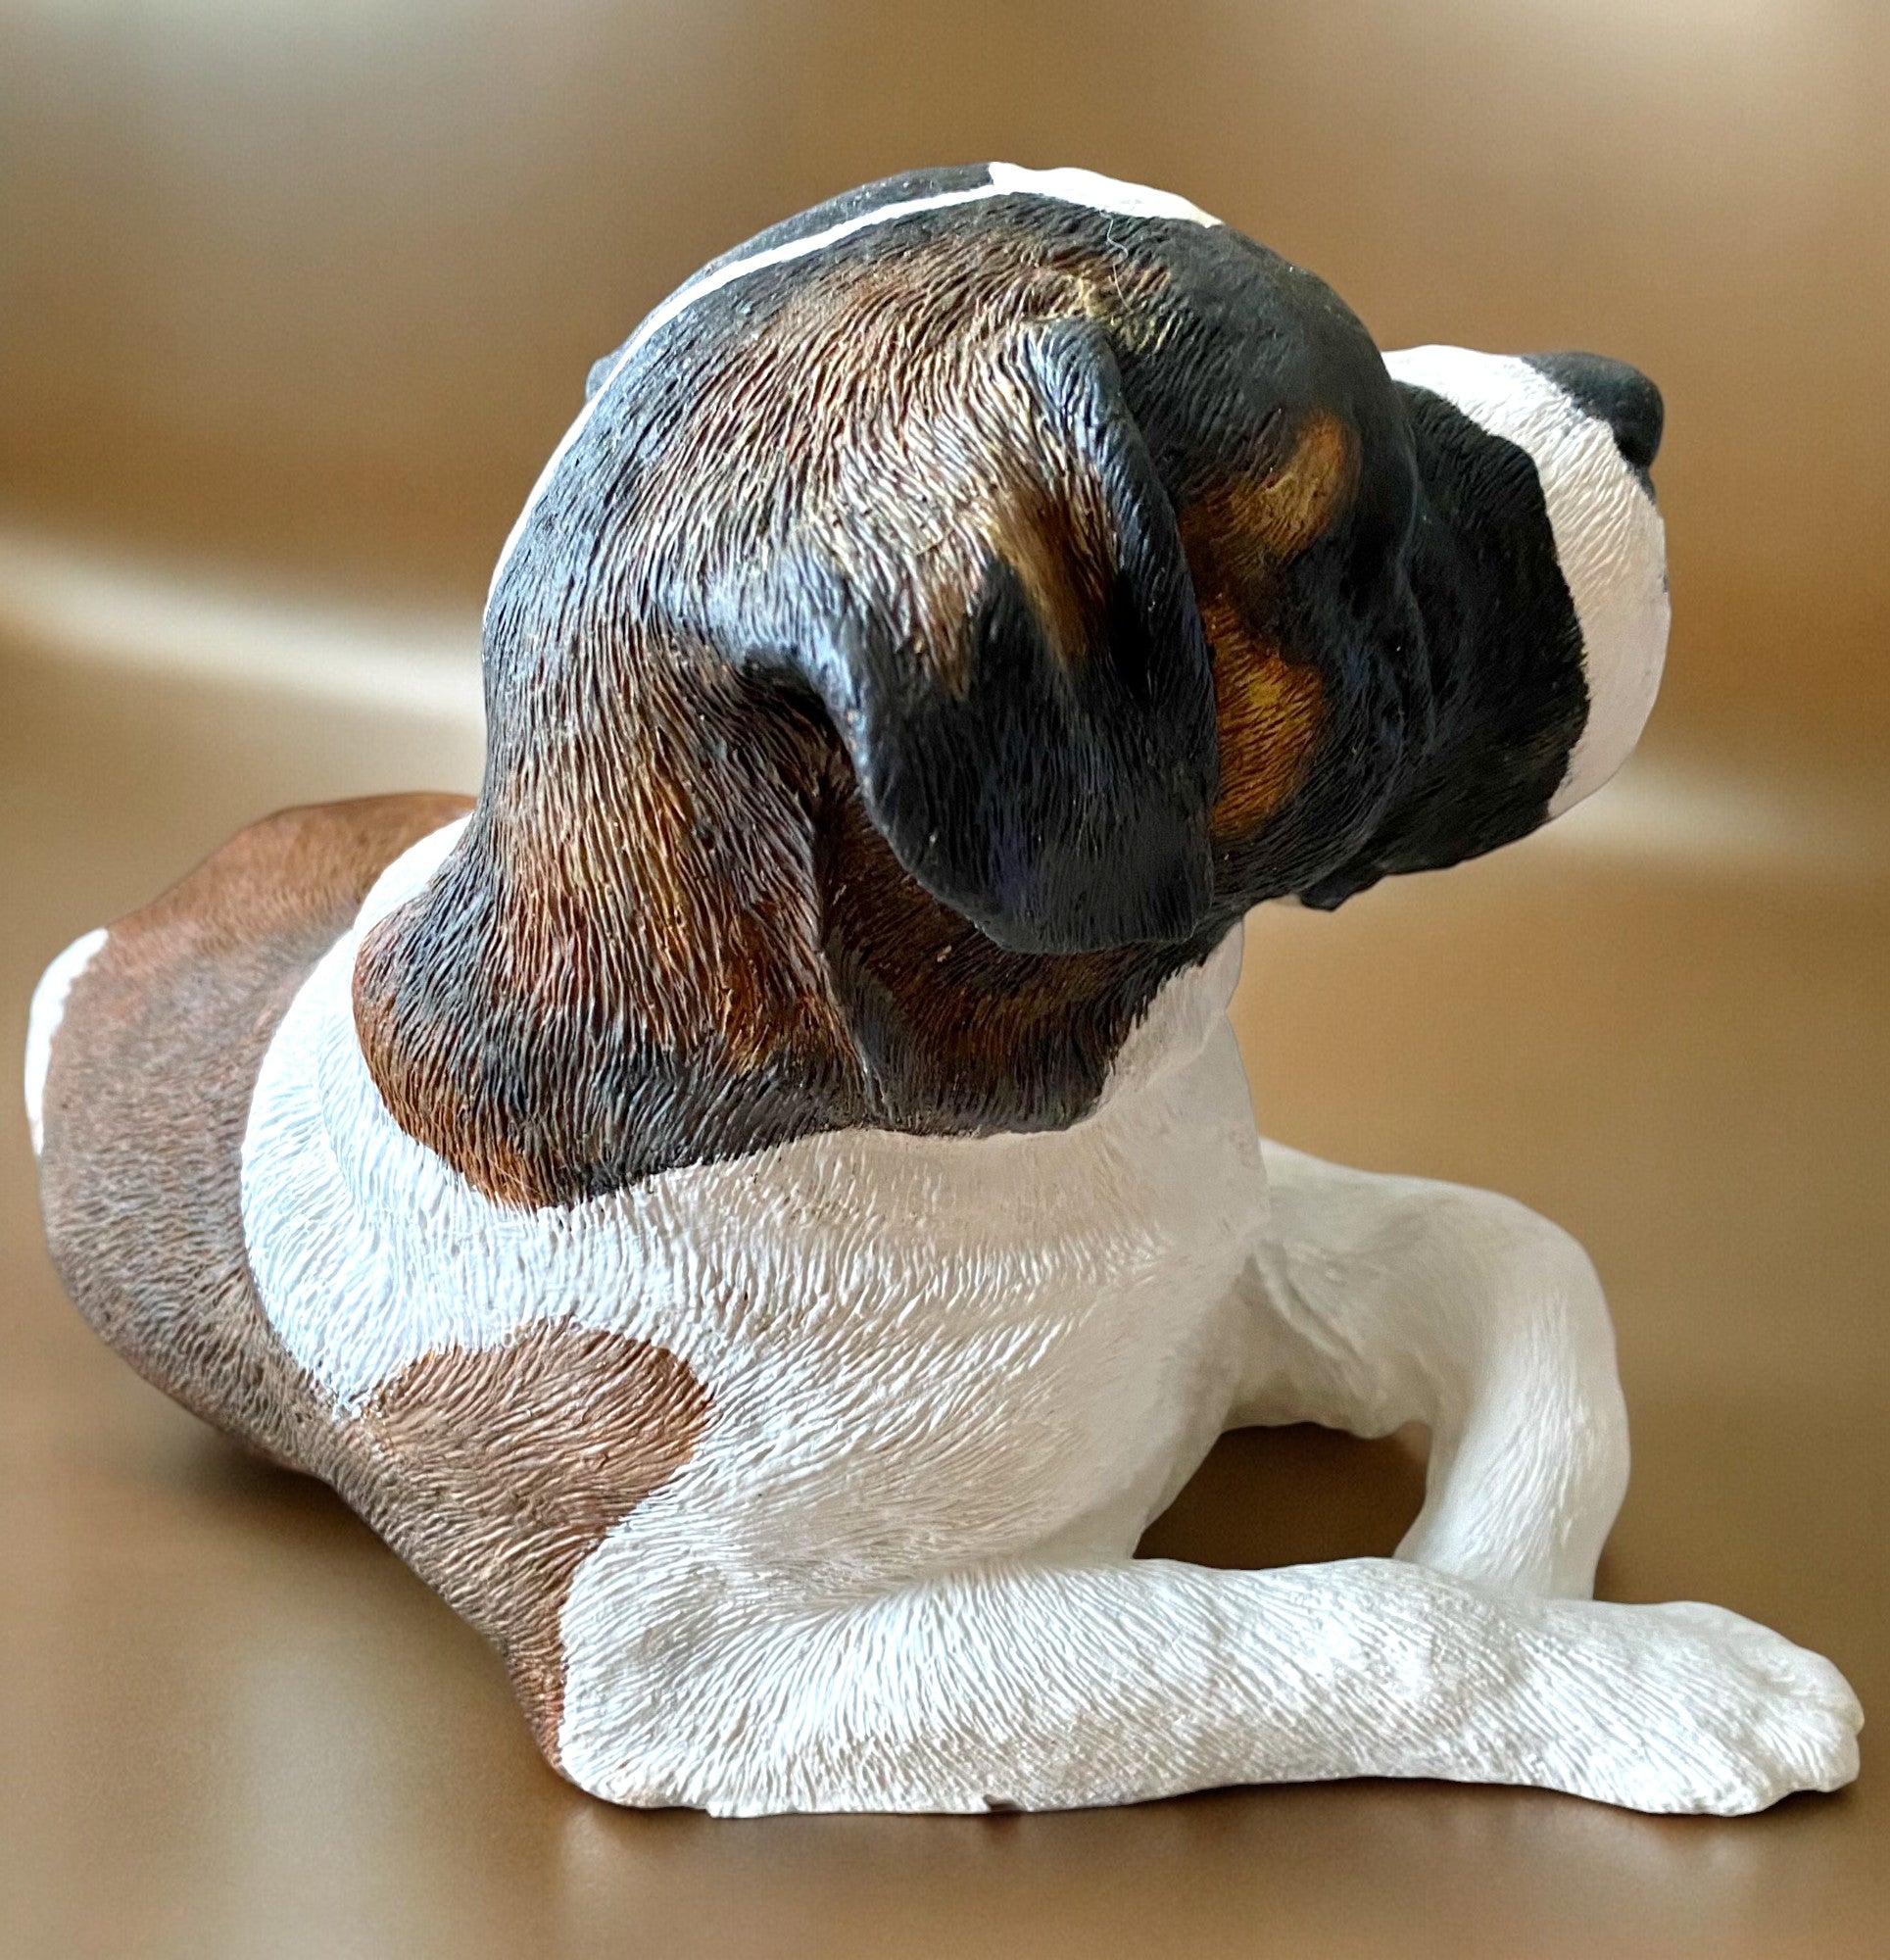 Saint Bernard statue made of concrete commissioned pet portrait of Charlie. Dog statue is laying down. Right side of statue.